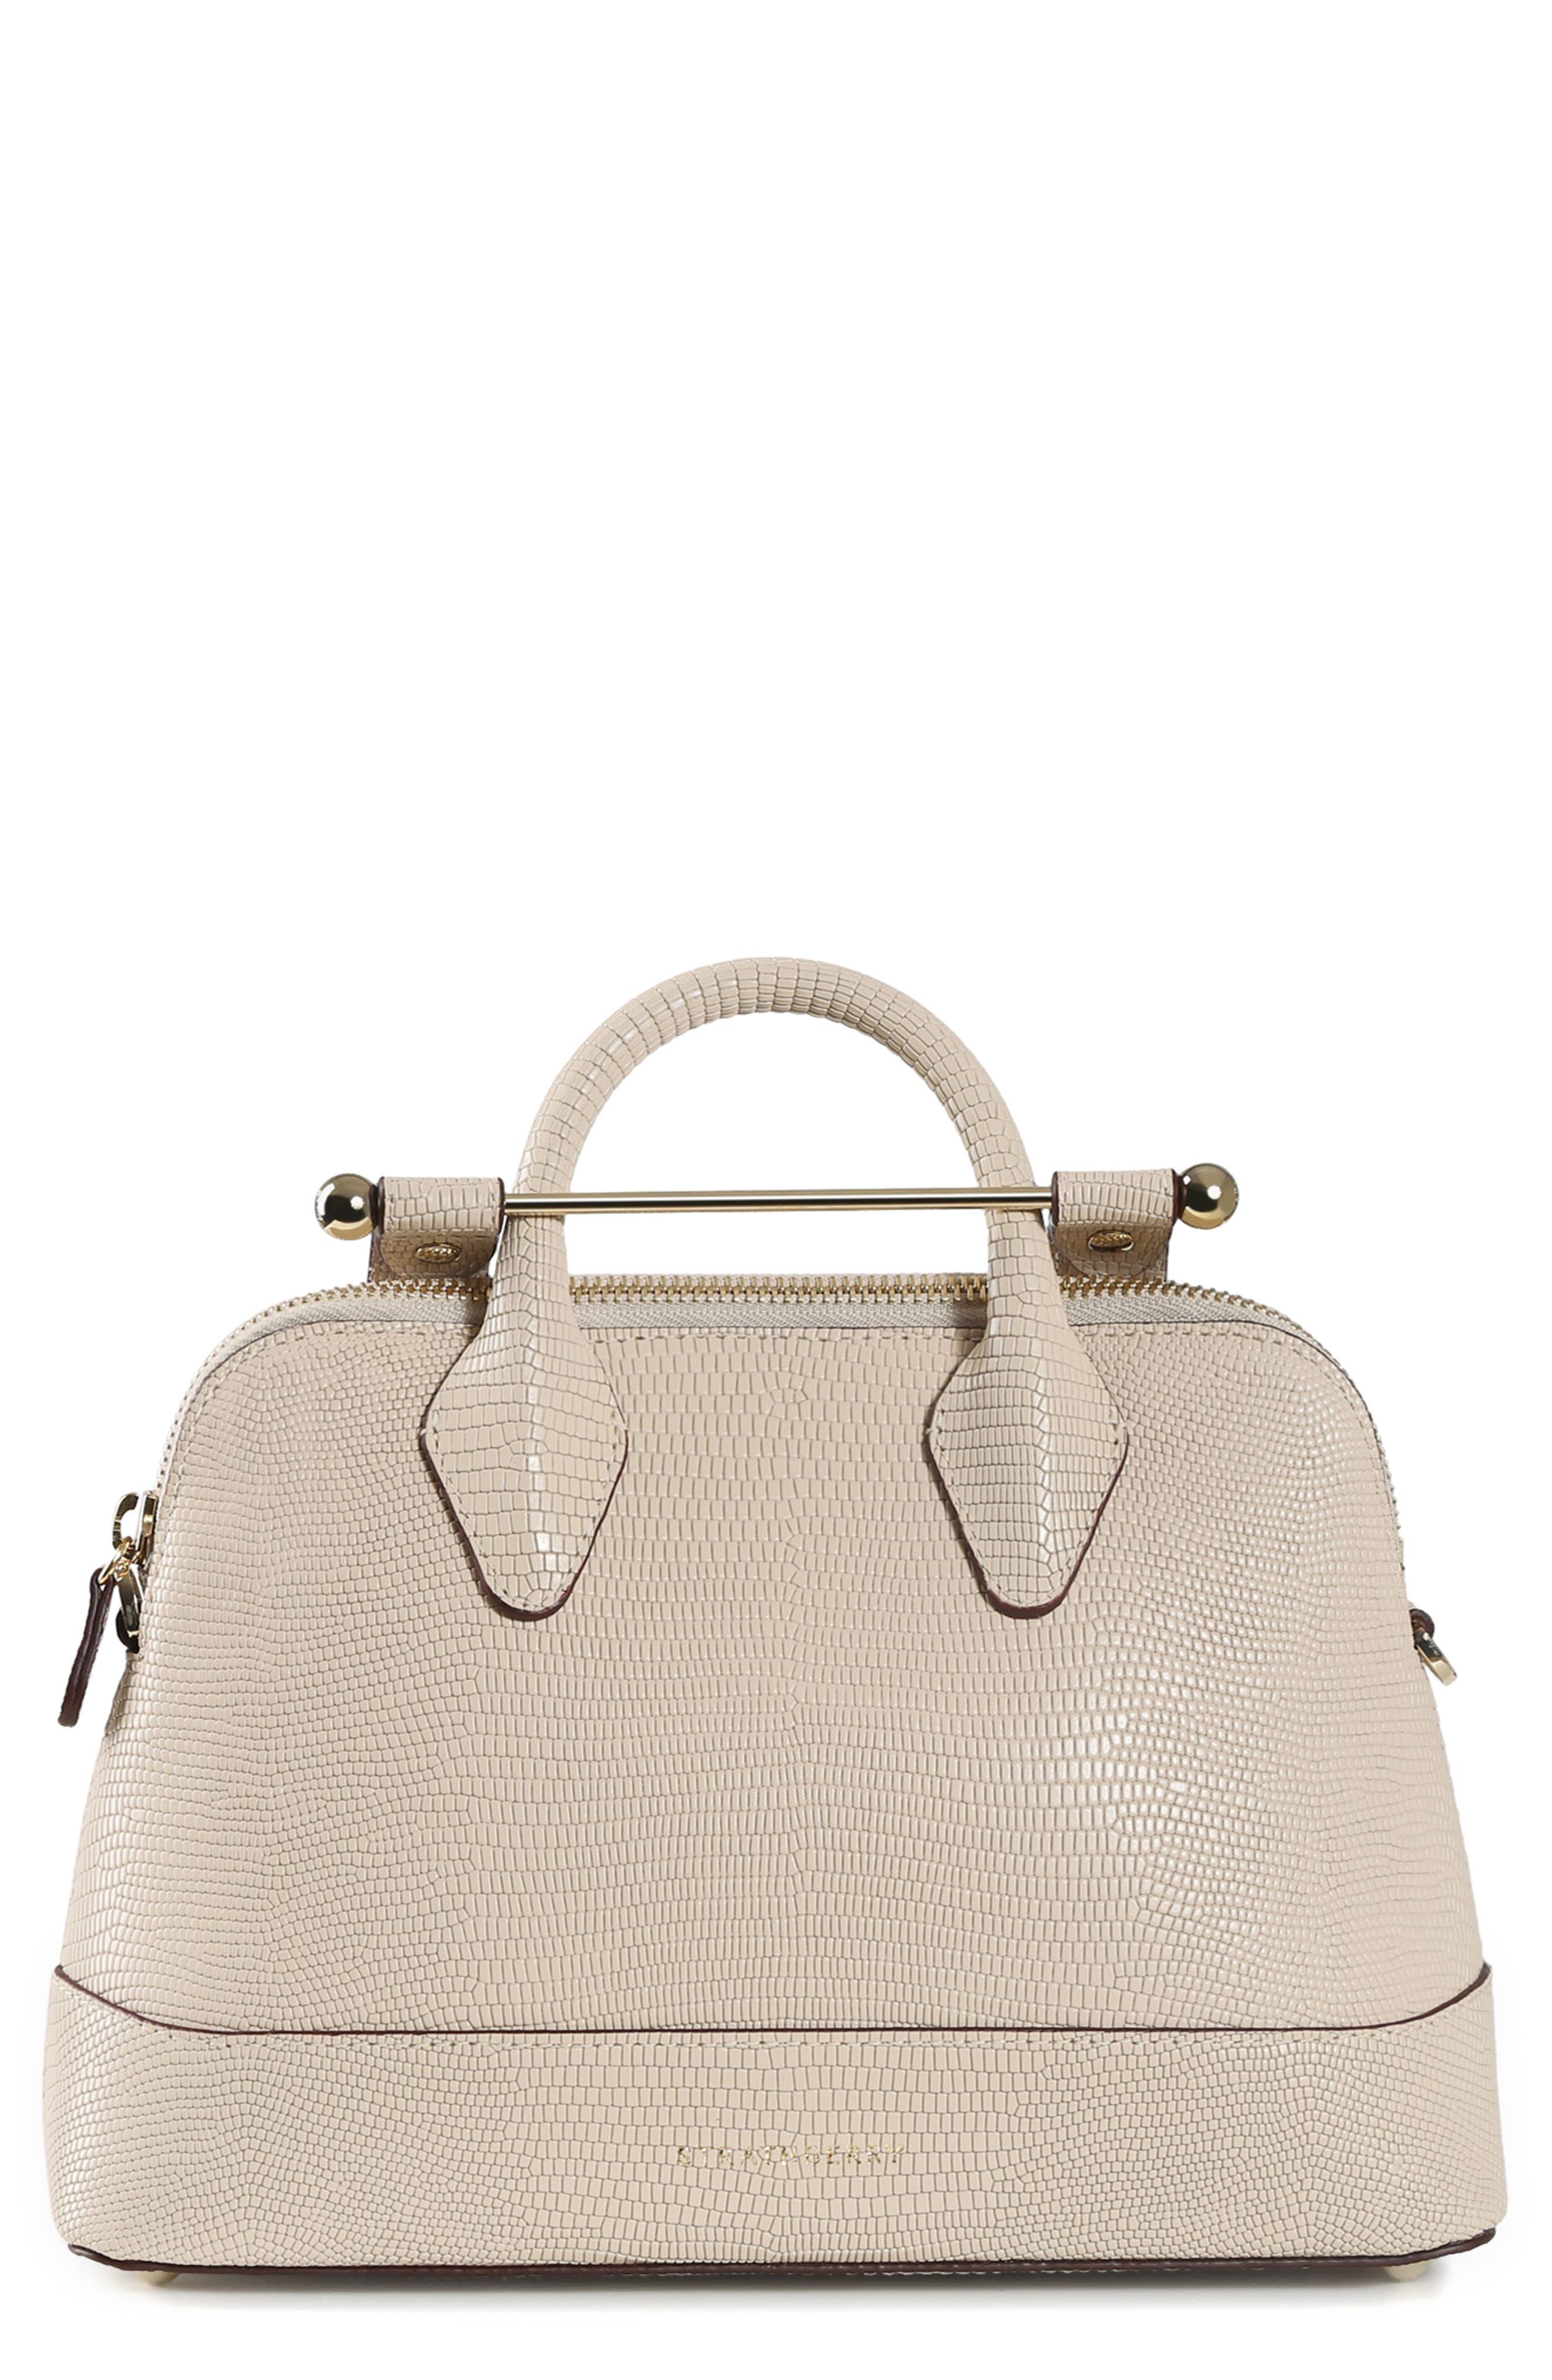 Strathberry Mini Dome Lizard Embossed Leather Top Handle Bag in